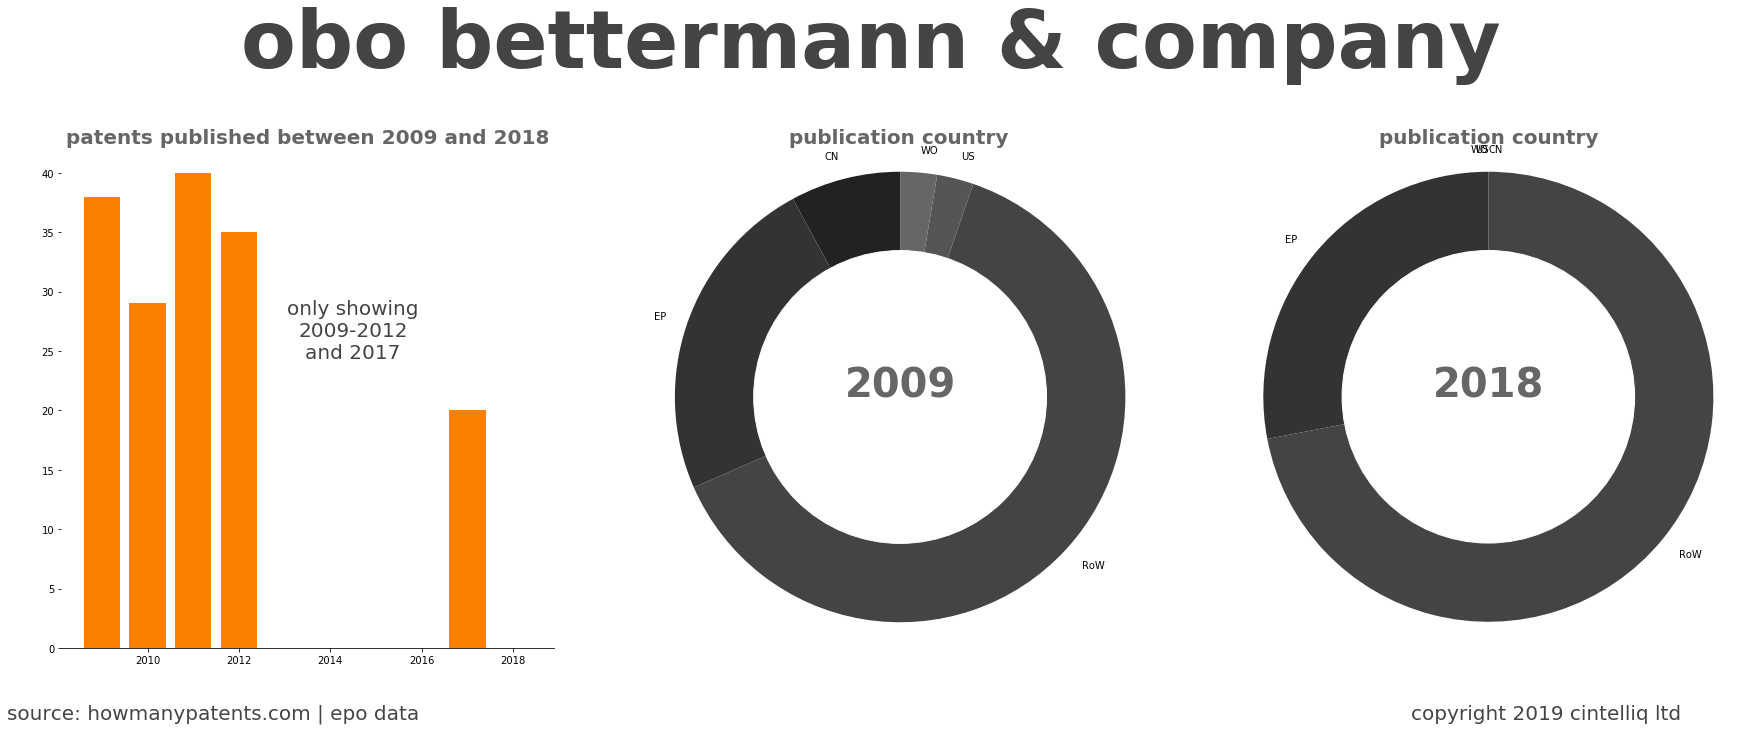 summary of patents for Obo Bettermann & Company